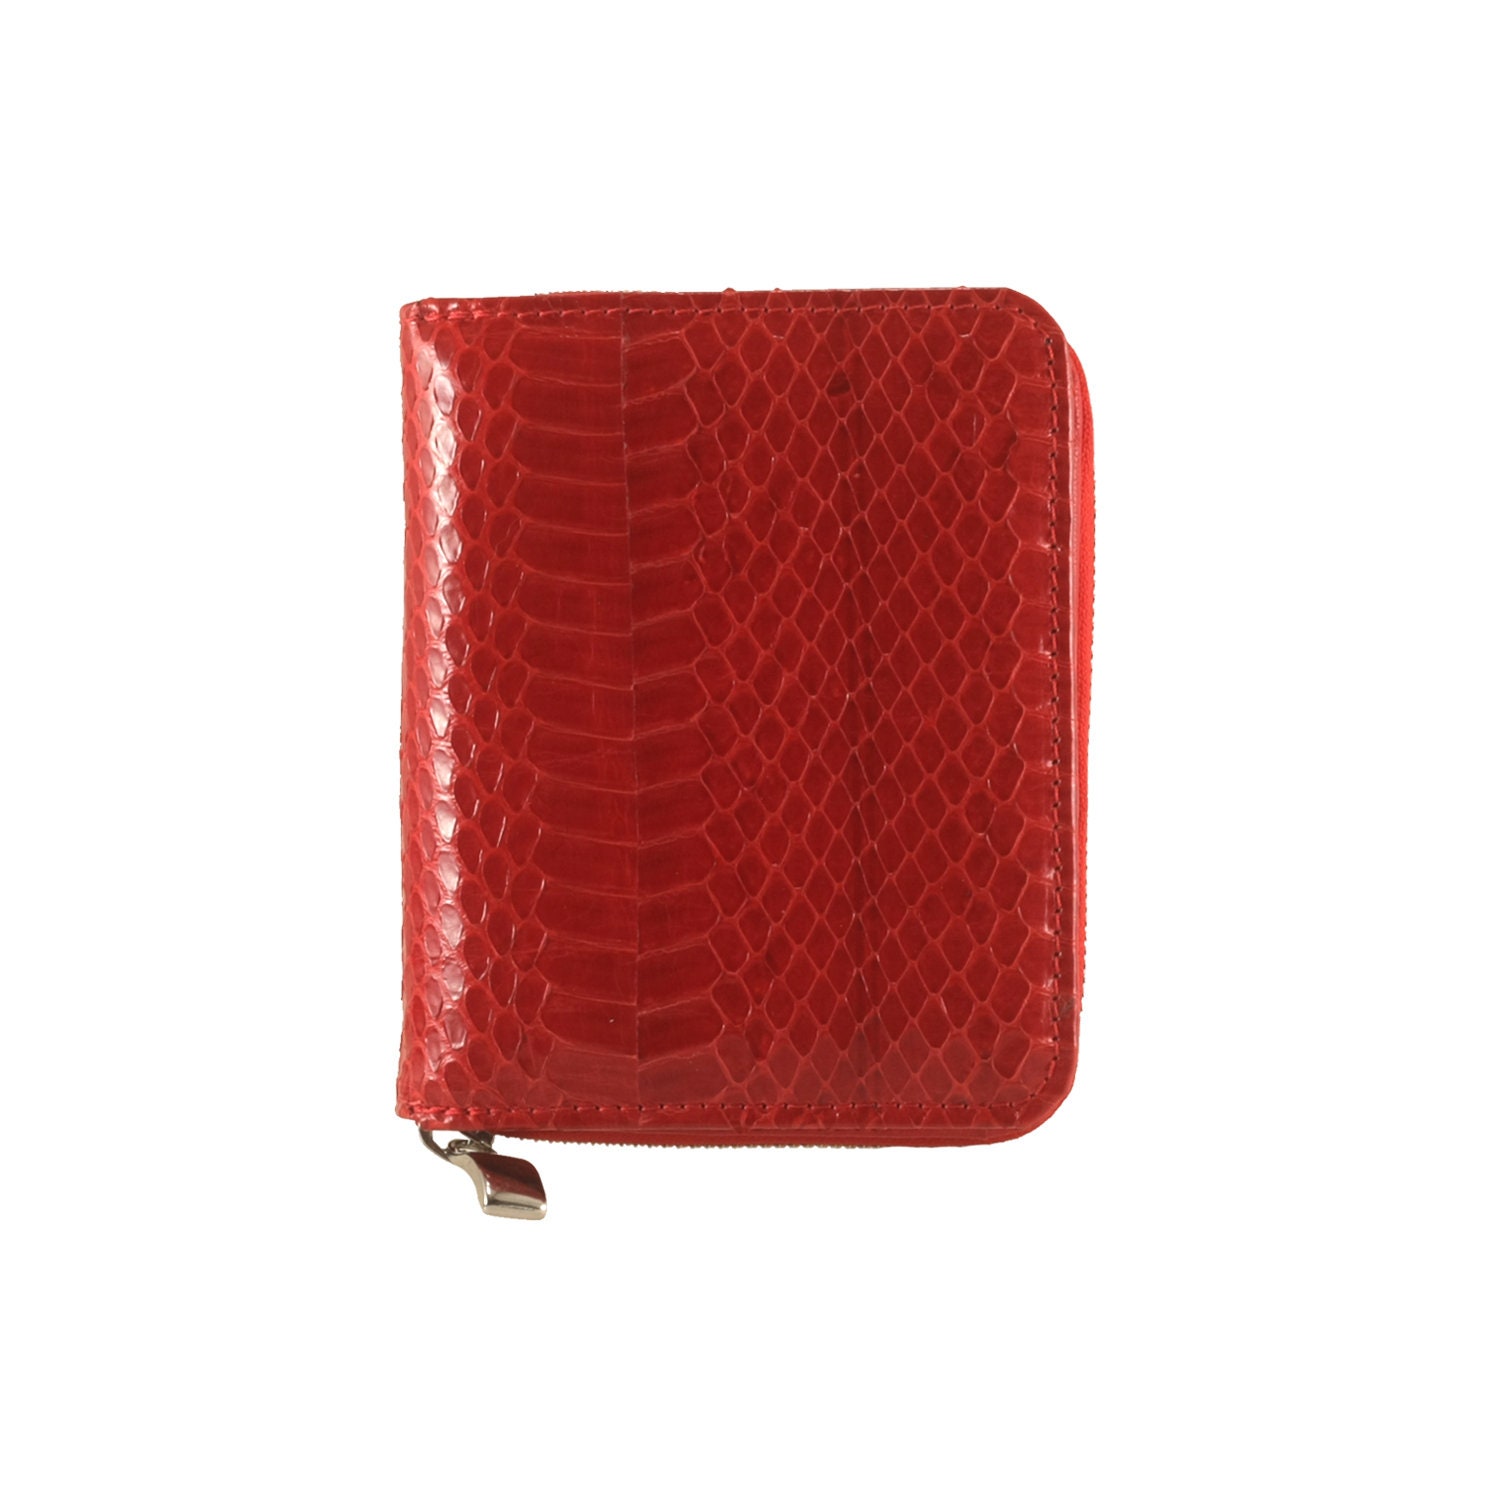 Small Wallet Snakeskin Python Leather Pink Mini Wallet Compact Wallet V-Type